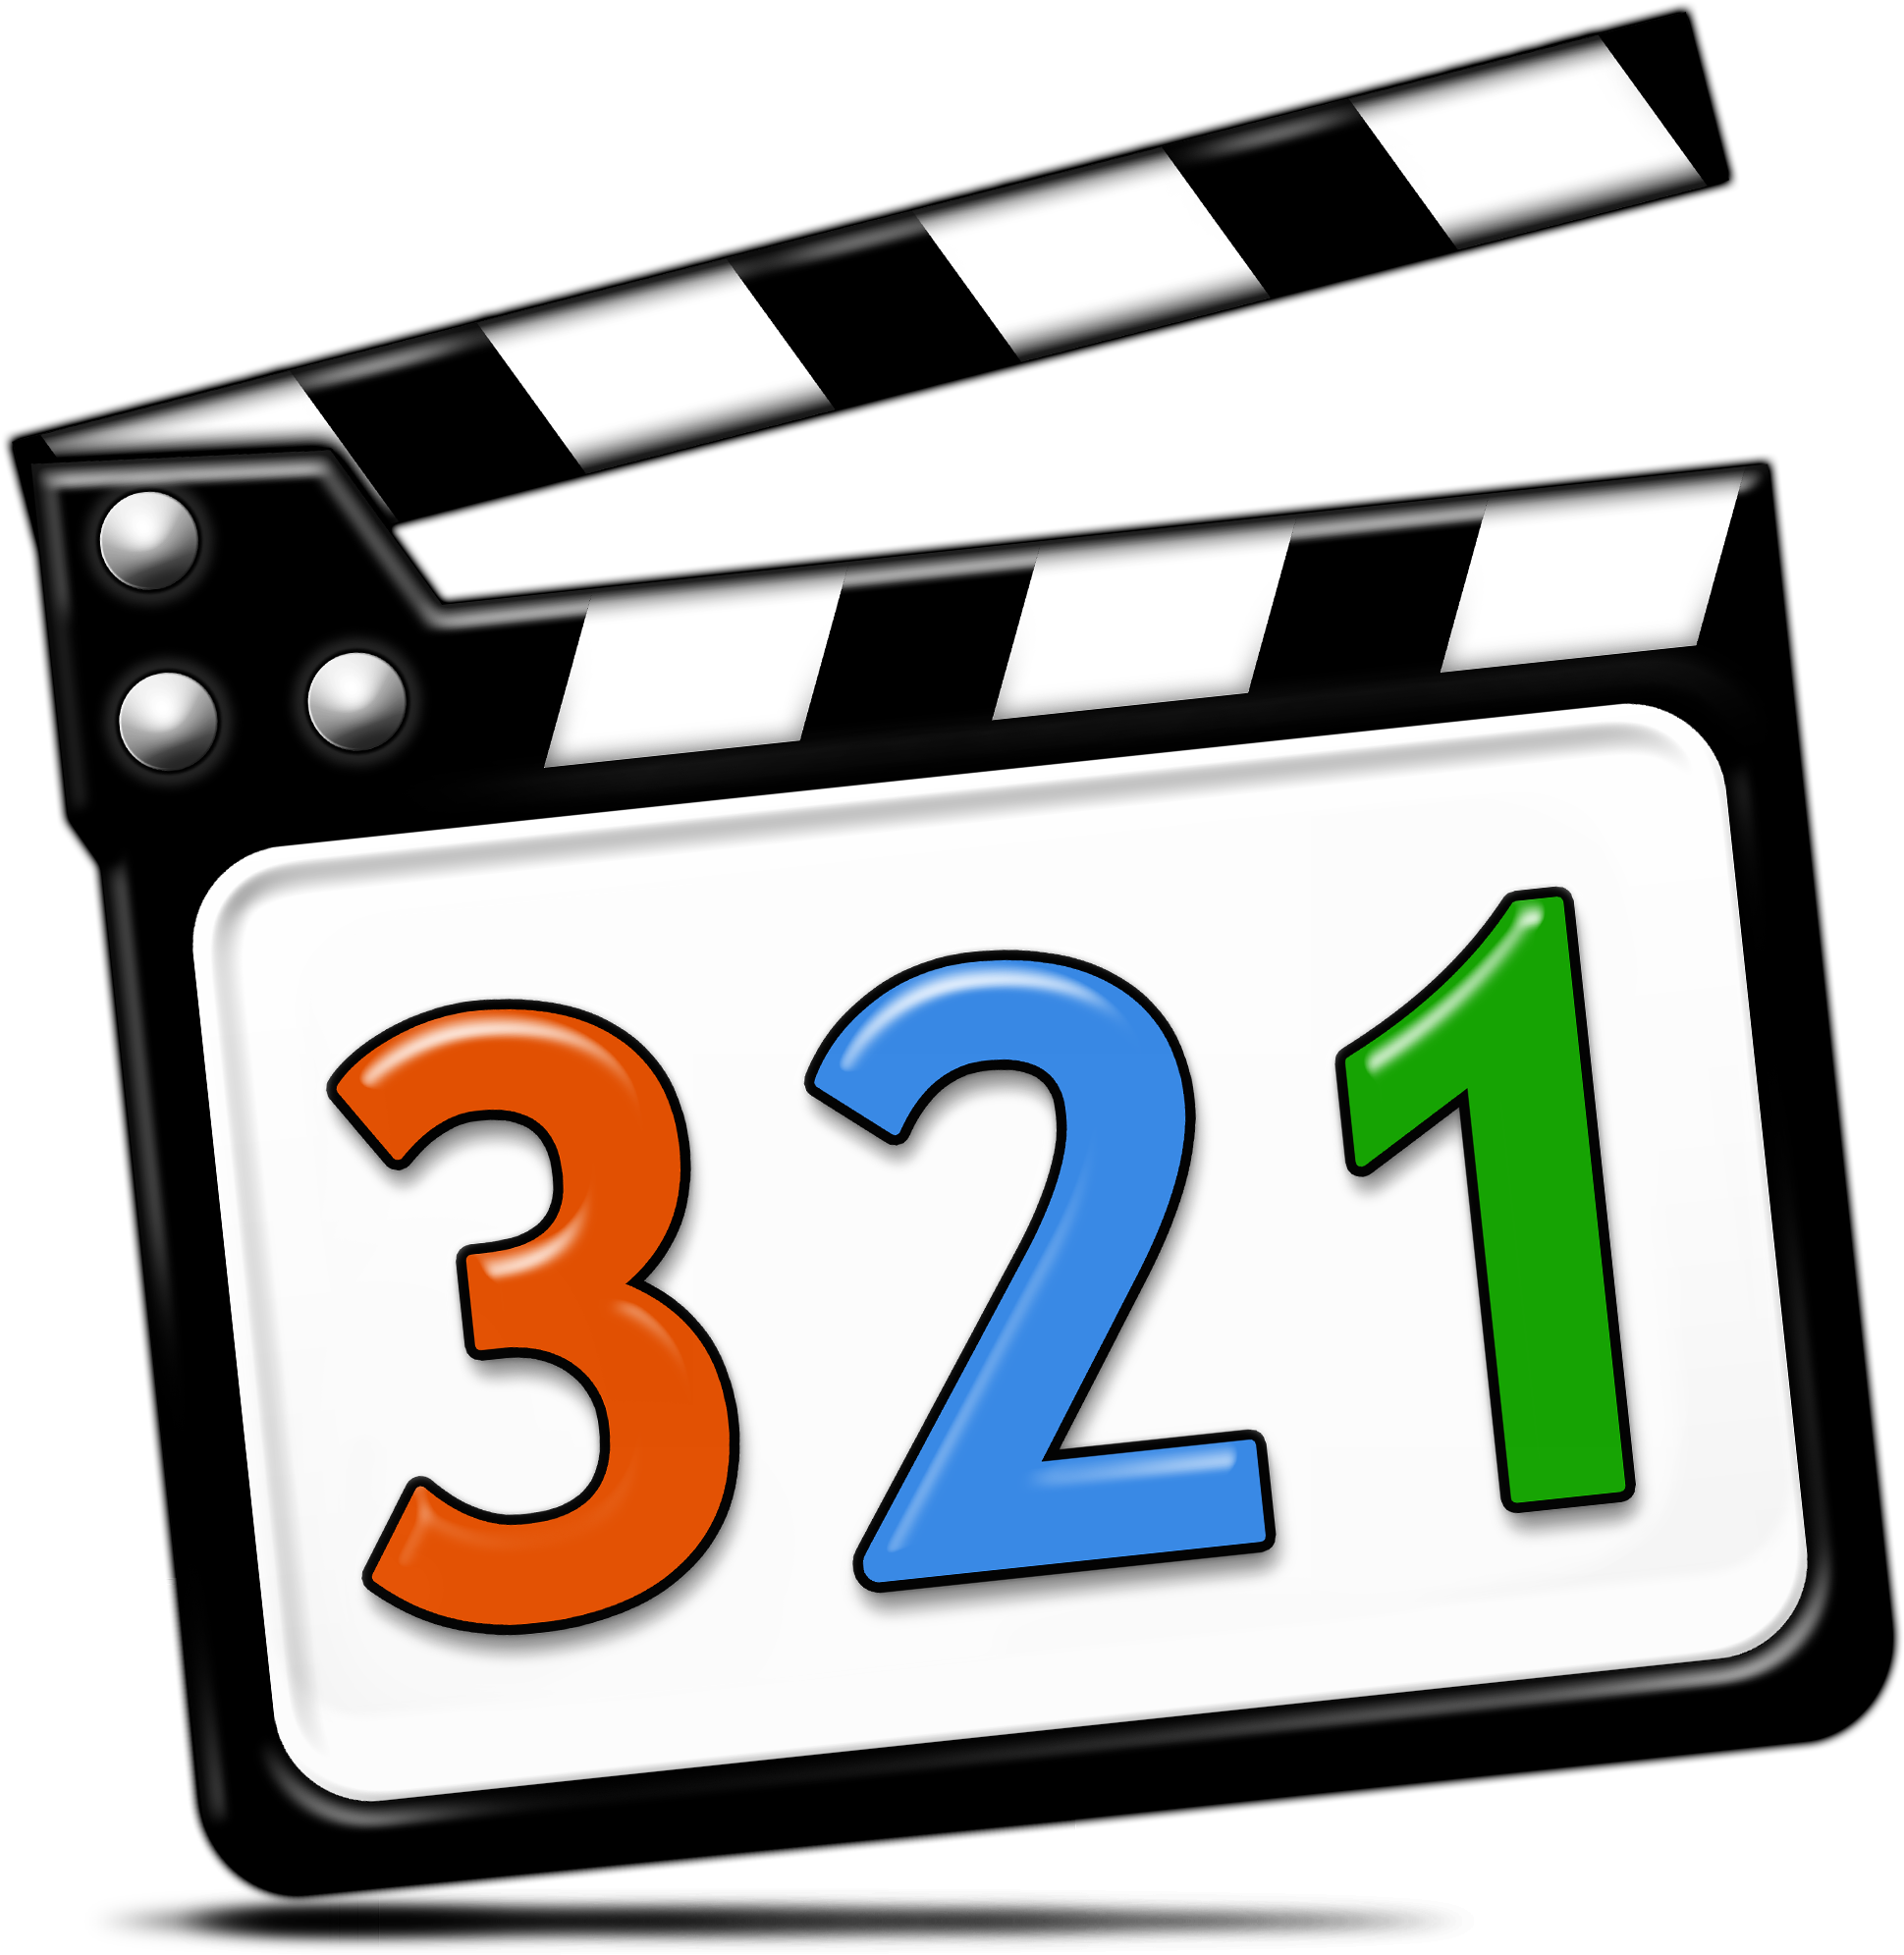 K-lite Codec Pack Will Play 99% Of All The Video Files - Media Player Classic (2048x2048)